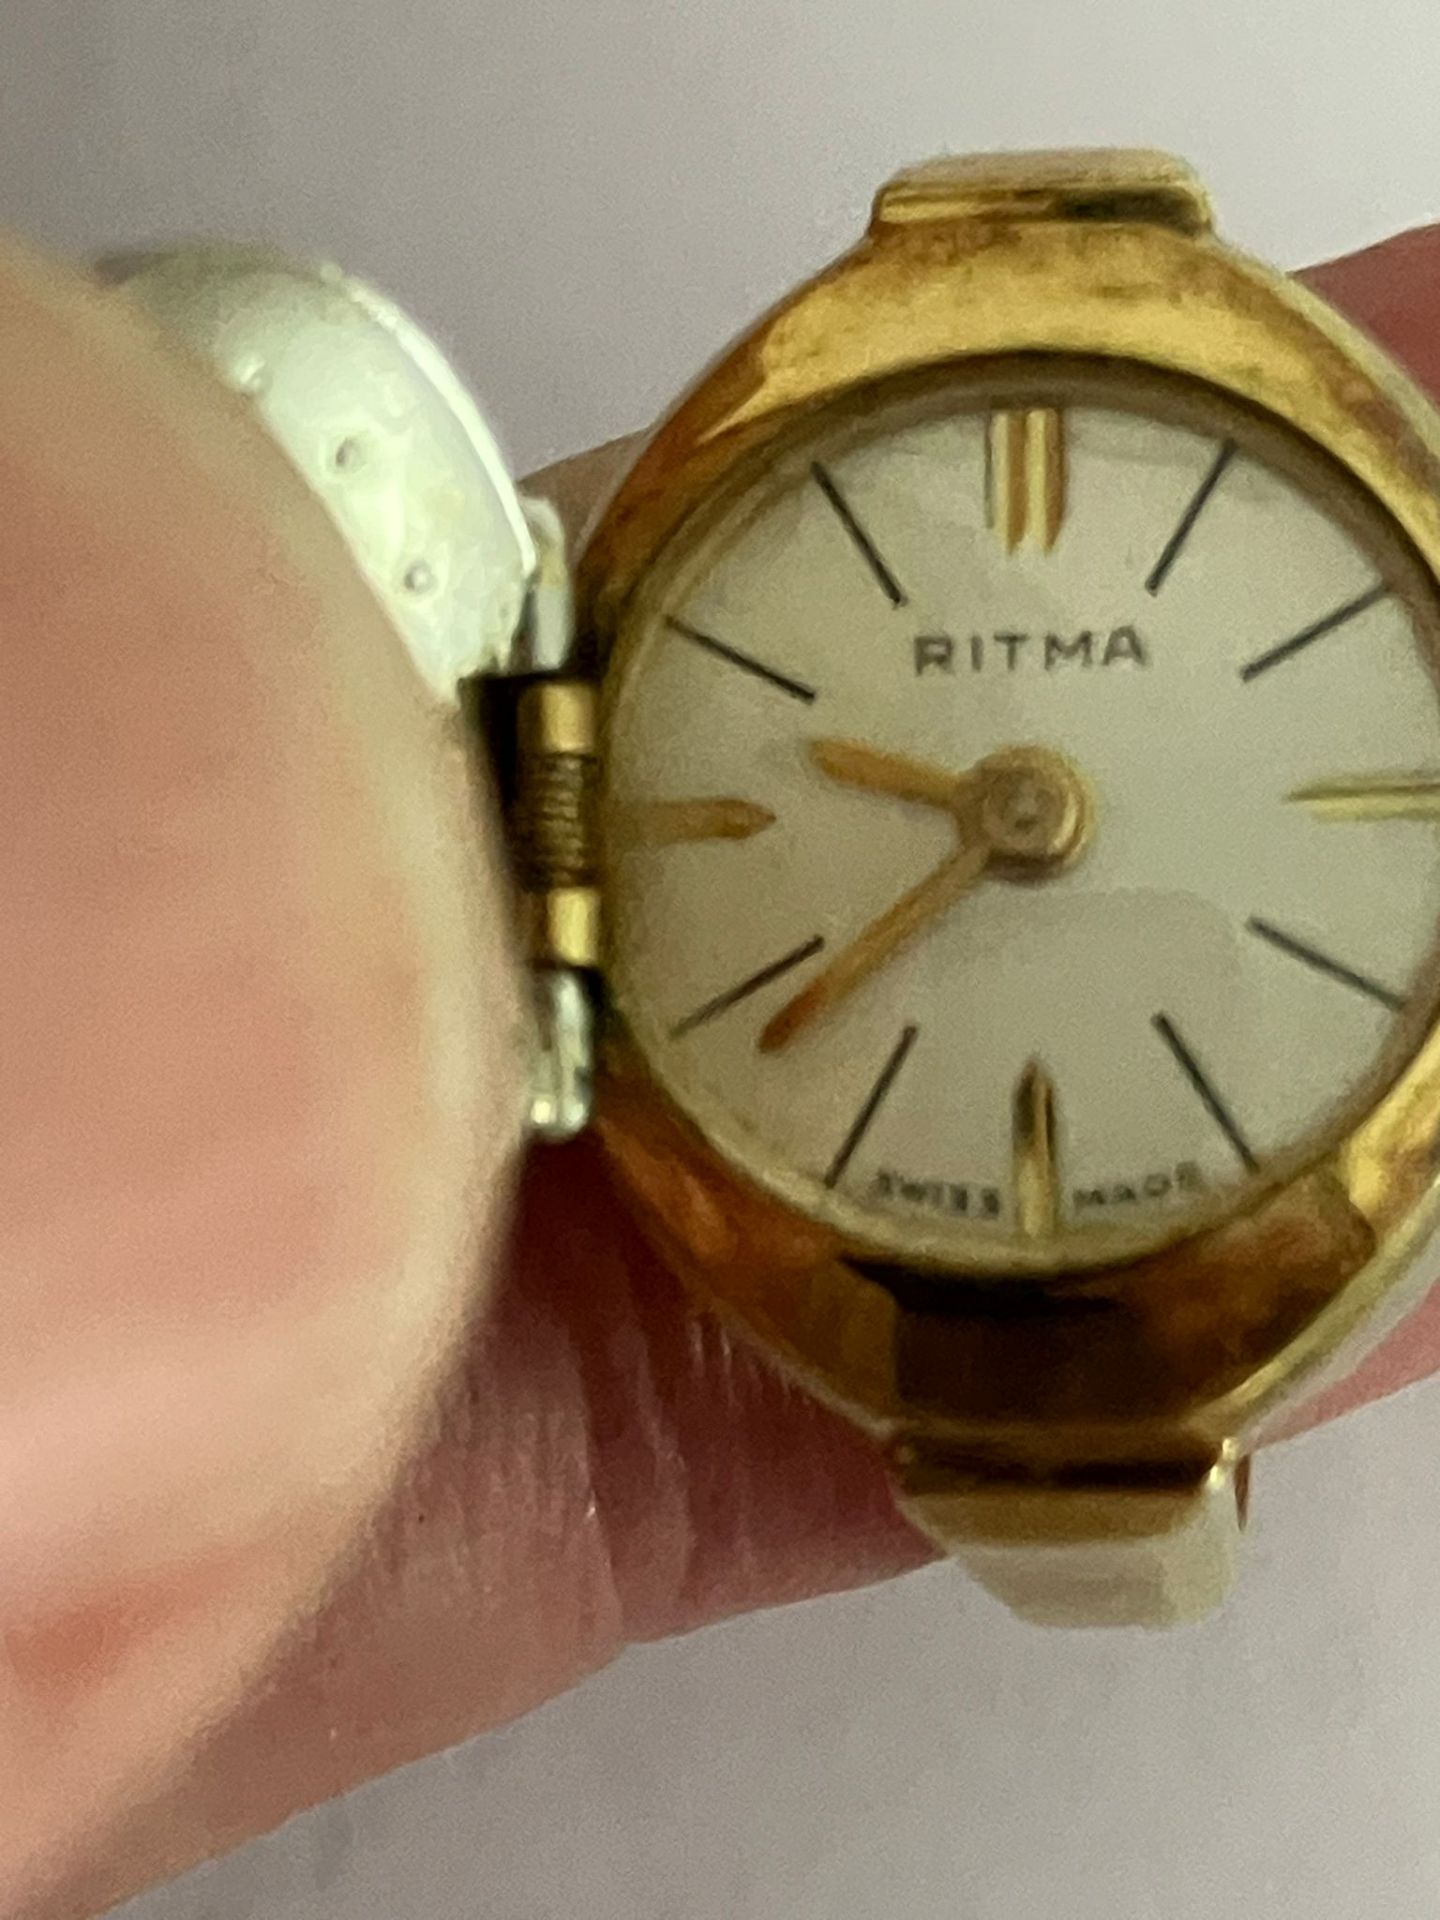 Ladies Beautiful Vintage GOLD PLATED (10 Microns) RITMA RING WATCH. Swiss made having jewelled bezel - Image 3 of 9